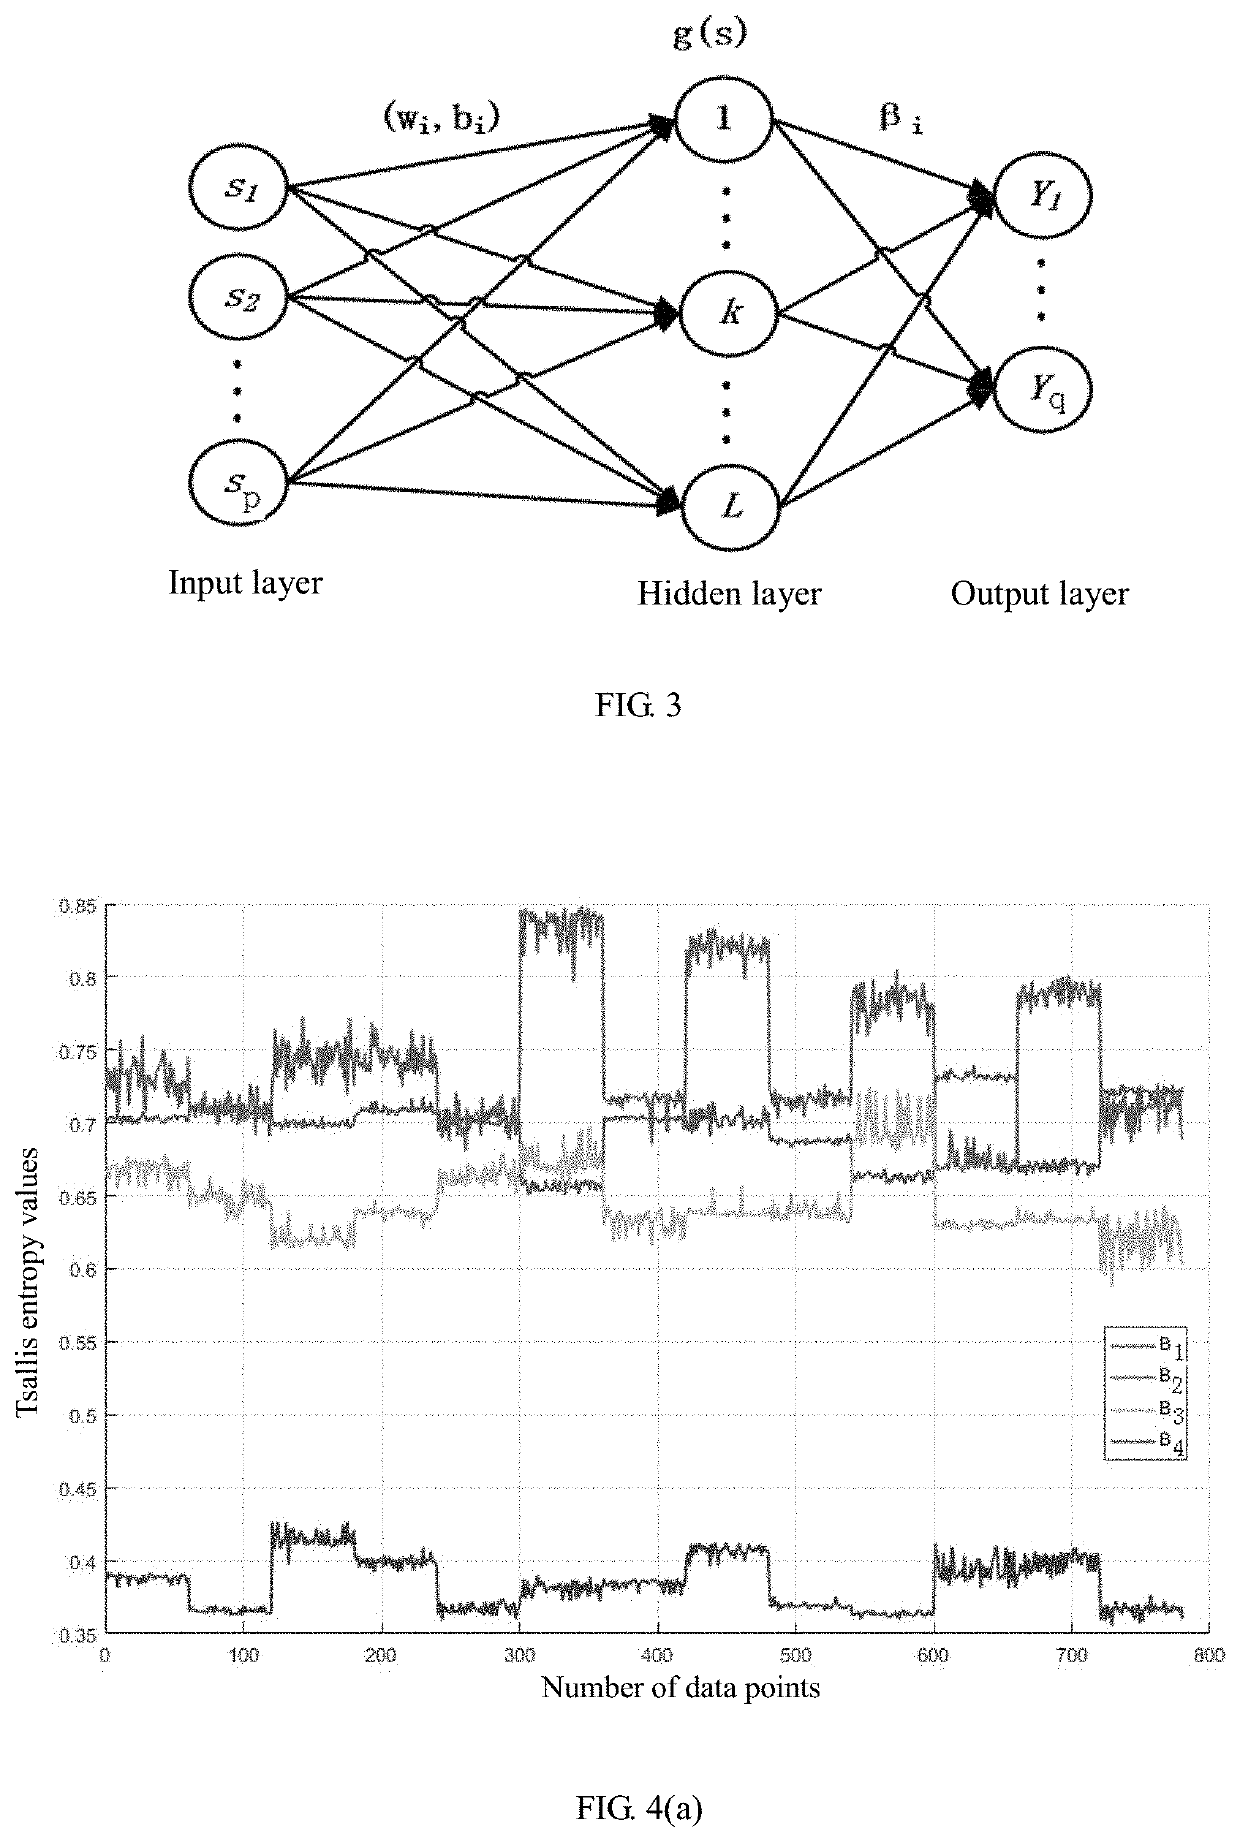 Analog-circuit fault diagnosis method based on continuous wavelet analysis and elm network